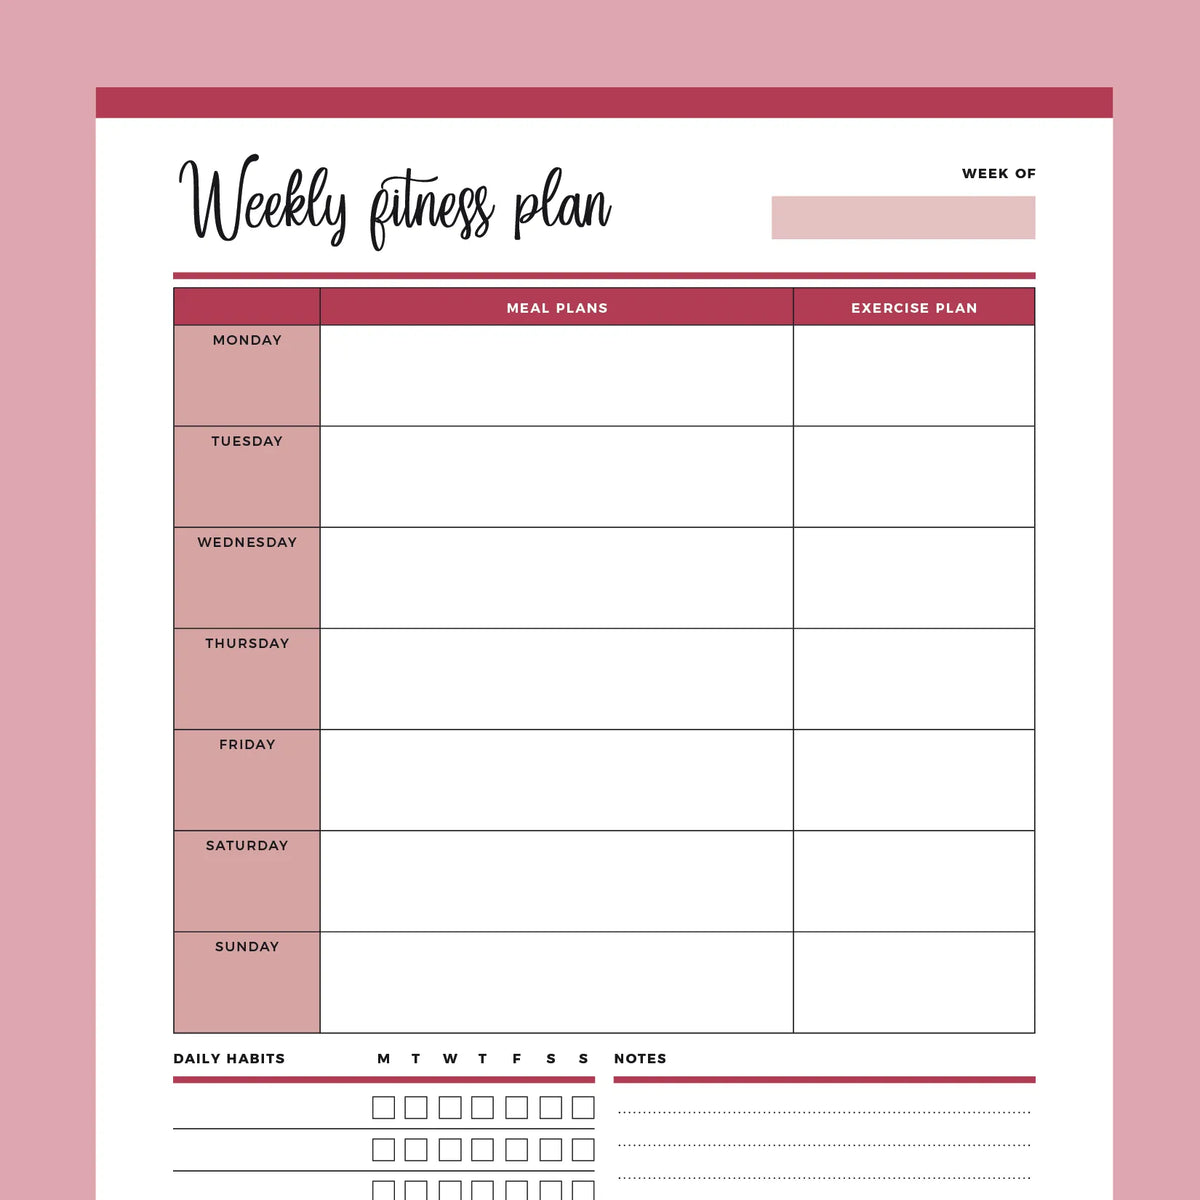 Weekly Fitness Planner Printable, Exercise Journal Workout Log 